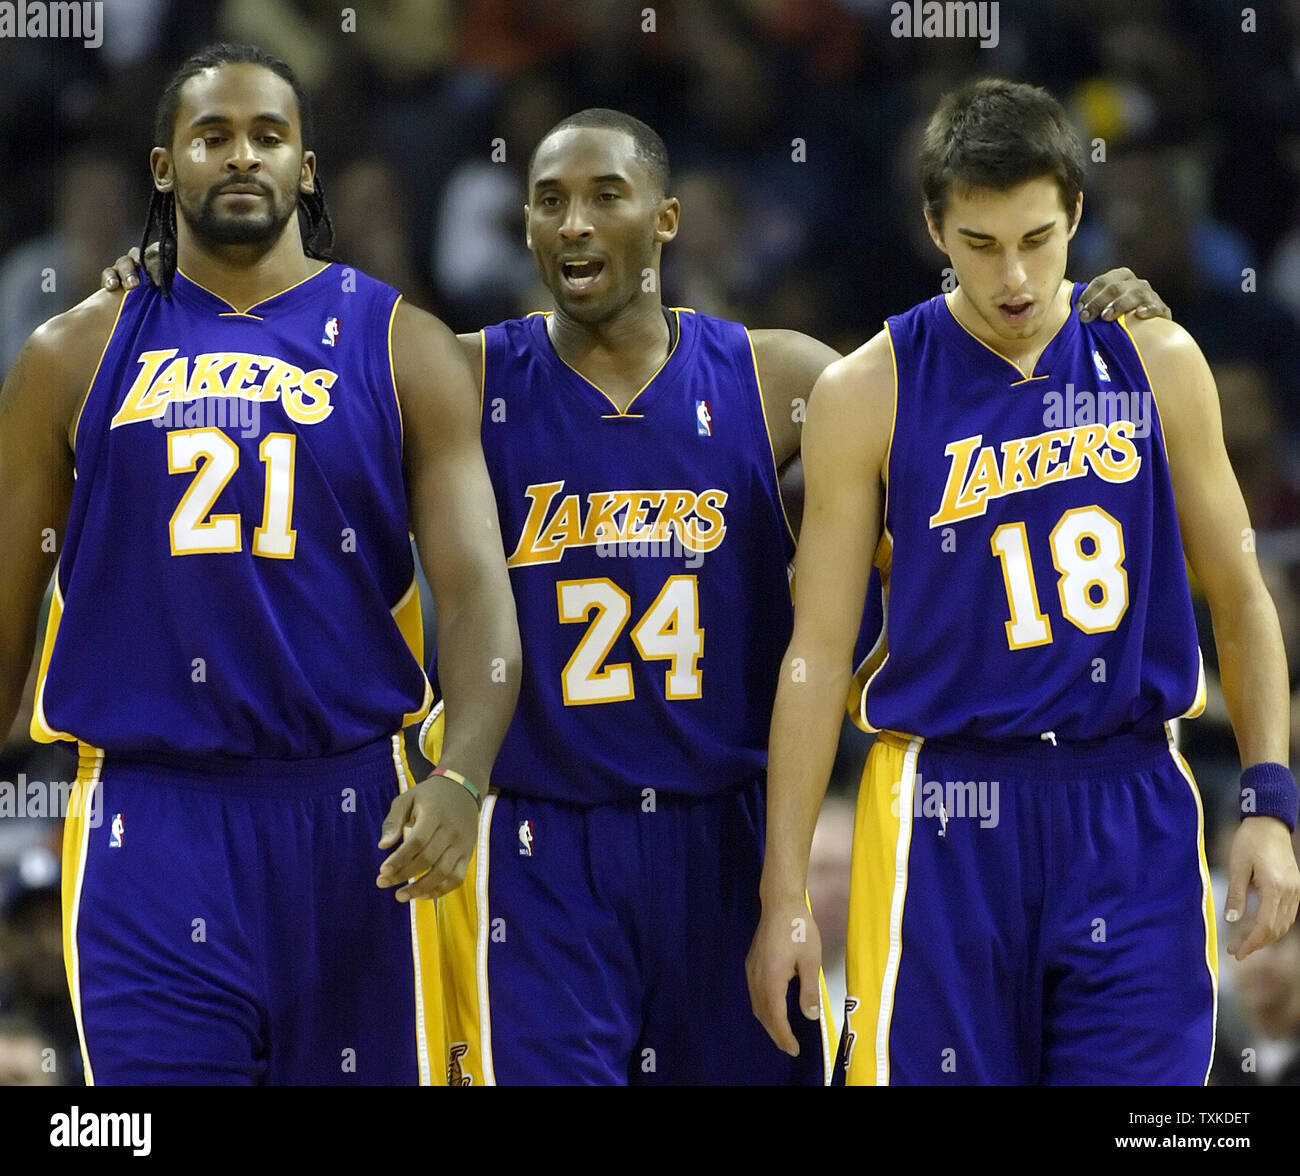 Los Angeles Lakers guard Kobe Bryant, center, talks to teammates Ronny Turiaf, left, and Sasha Vujacic of Slovenia during a timeout as his team plays the Charlotte Bobcats at the Charlotte Bobcats Arena in Charlotte, N.C. on December 29, 2006. (UPI Photo/Nell Redmond) Stock Photo